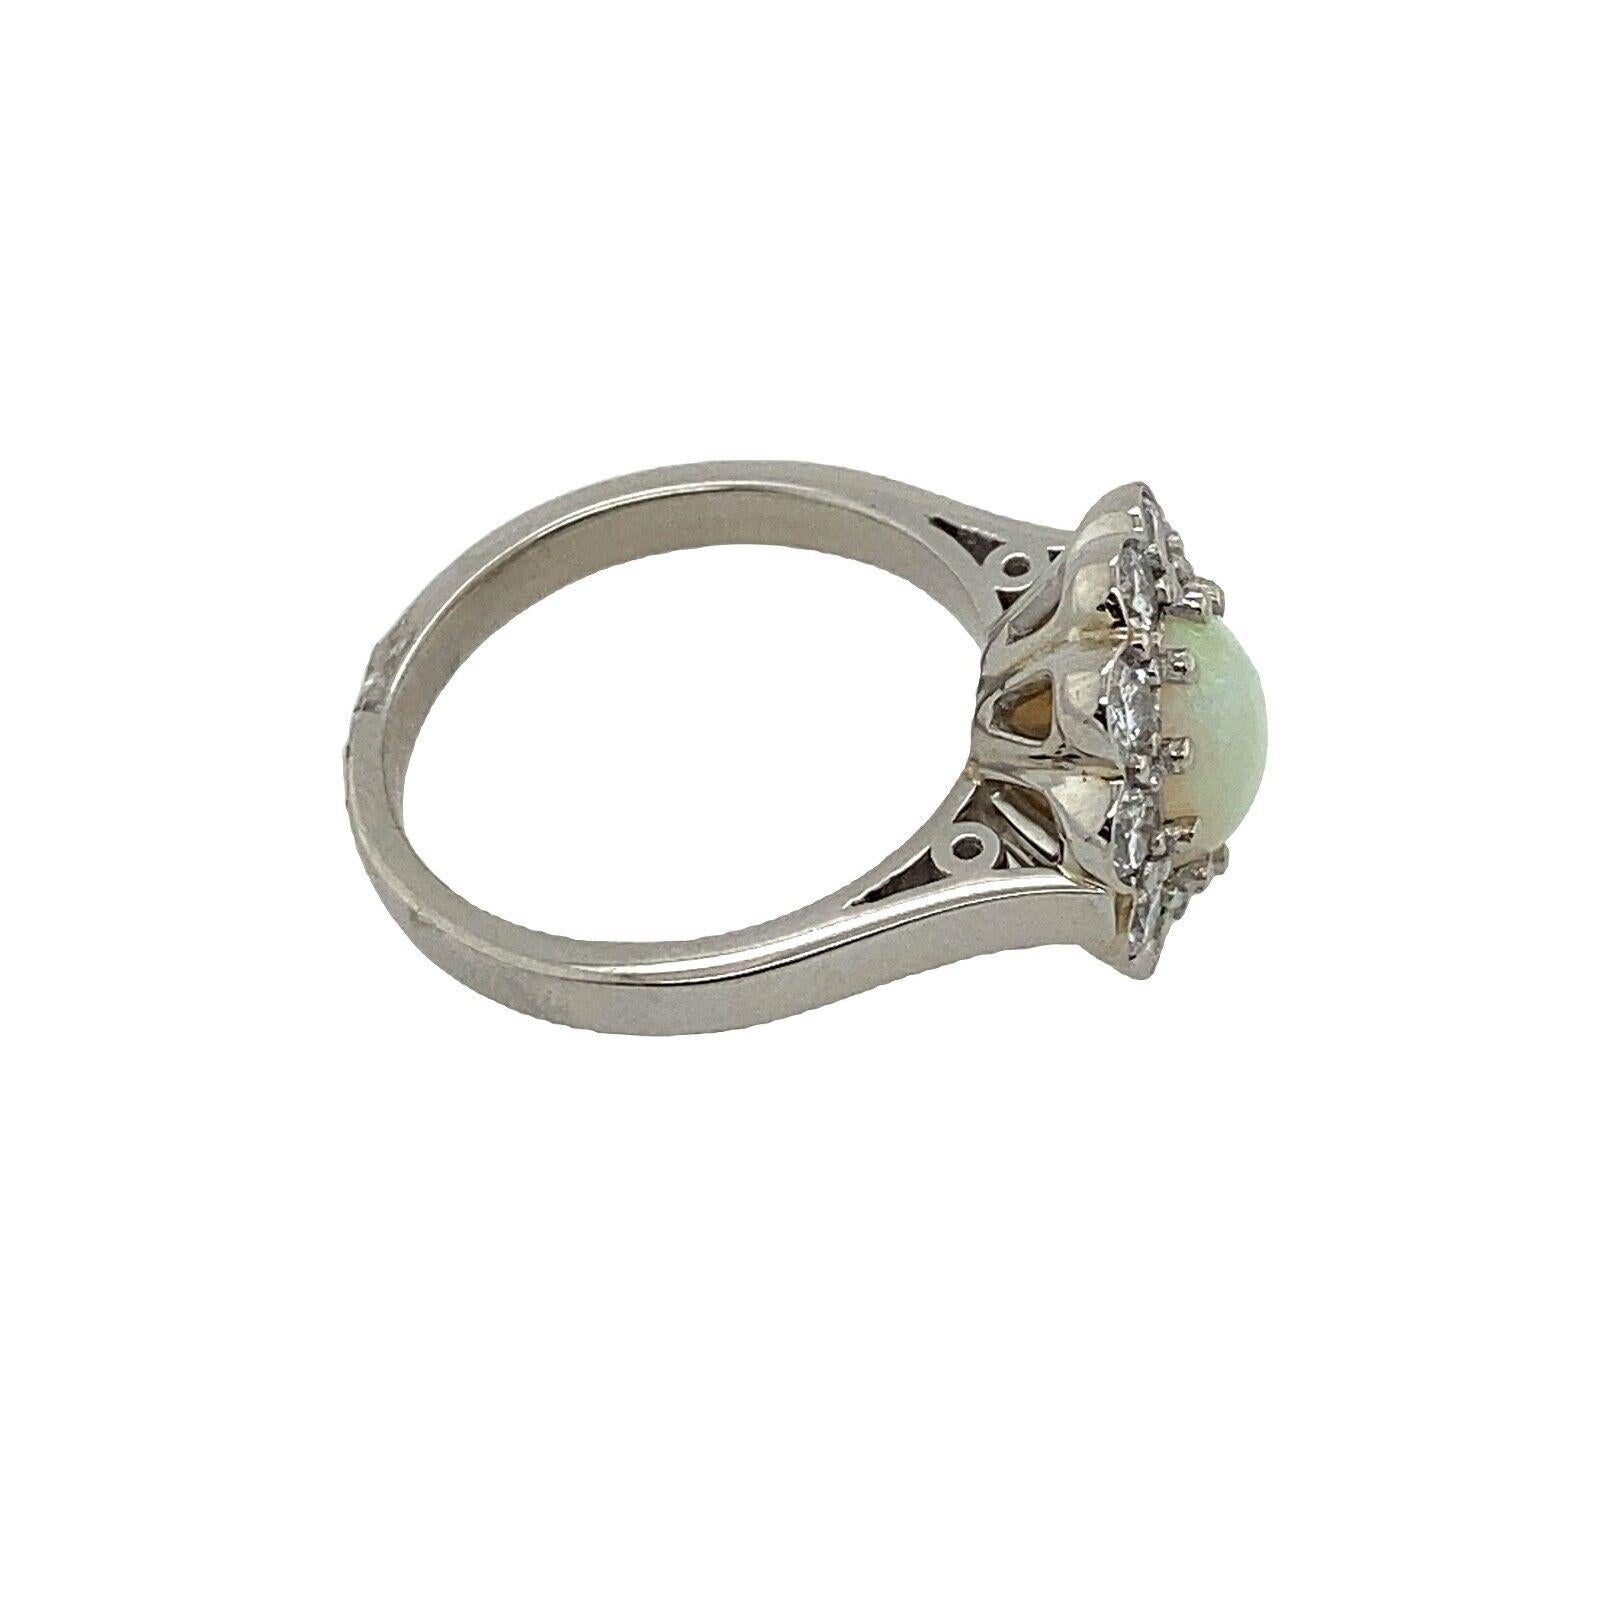 1.50ct Opal and 0.75ct Natural Diamonds Cluster Ring, Set Platinum
This gorgeous Opal and Diamond ring is a classic piece of jewellery. The centre stone is a 1.5ct Opal surrounded by 0.75ct natural Diamonds. This Opal and Diamond ring is a beautiful